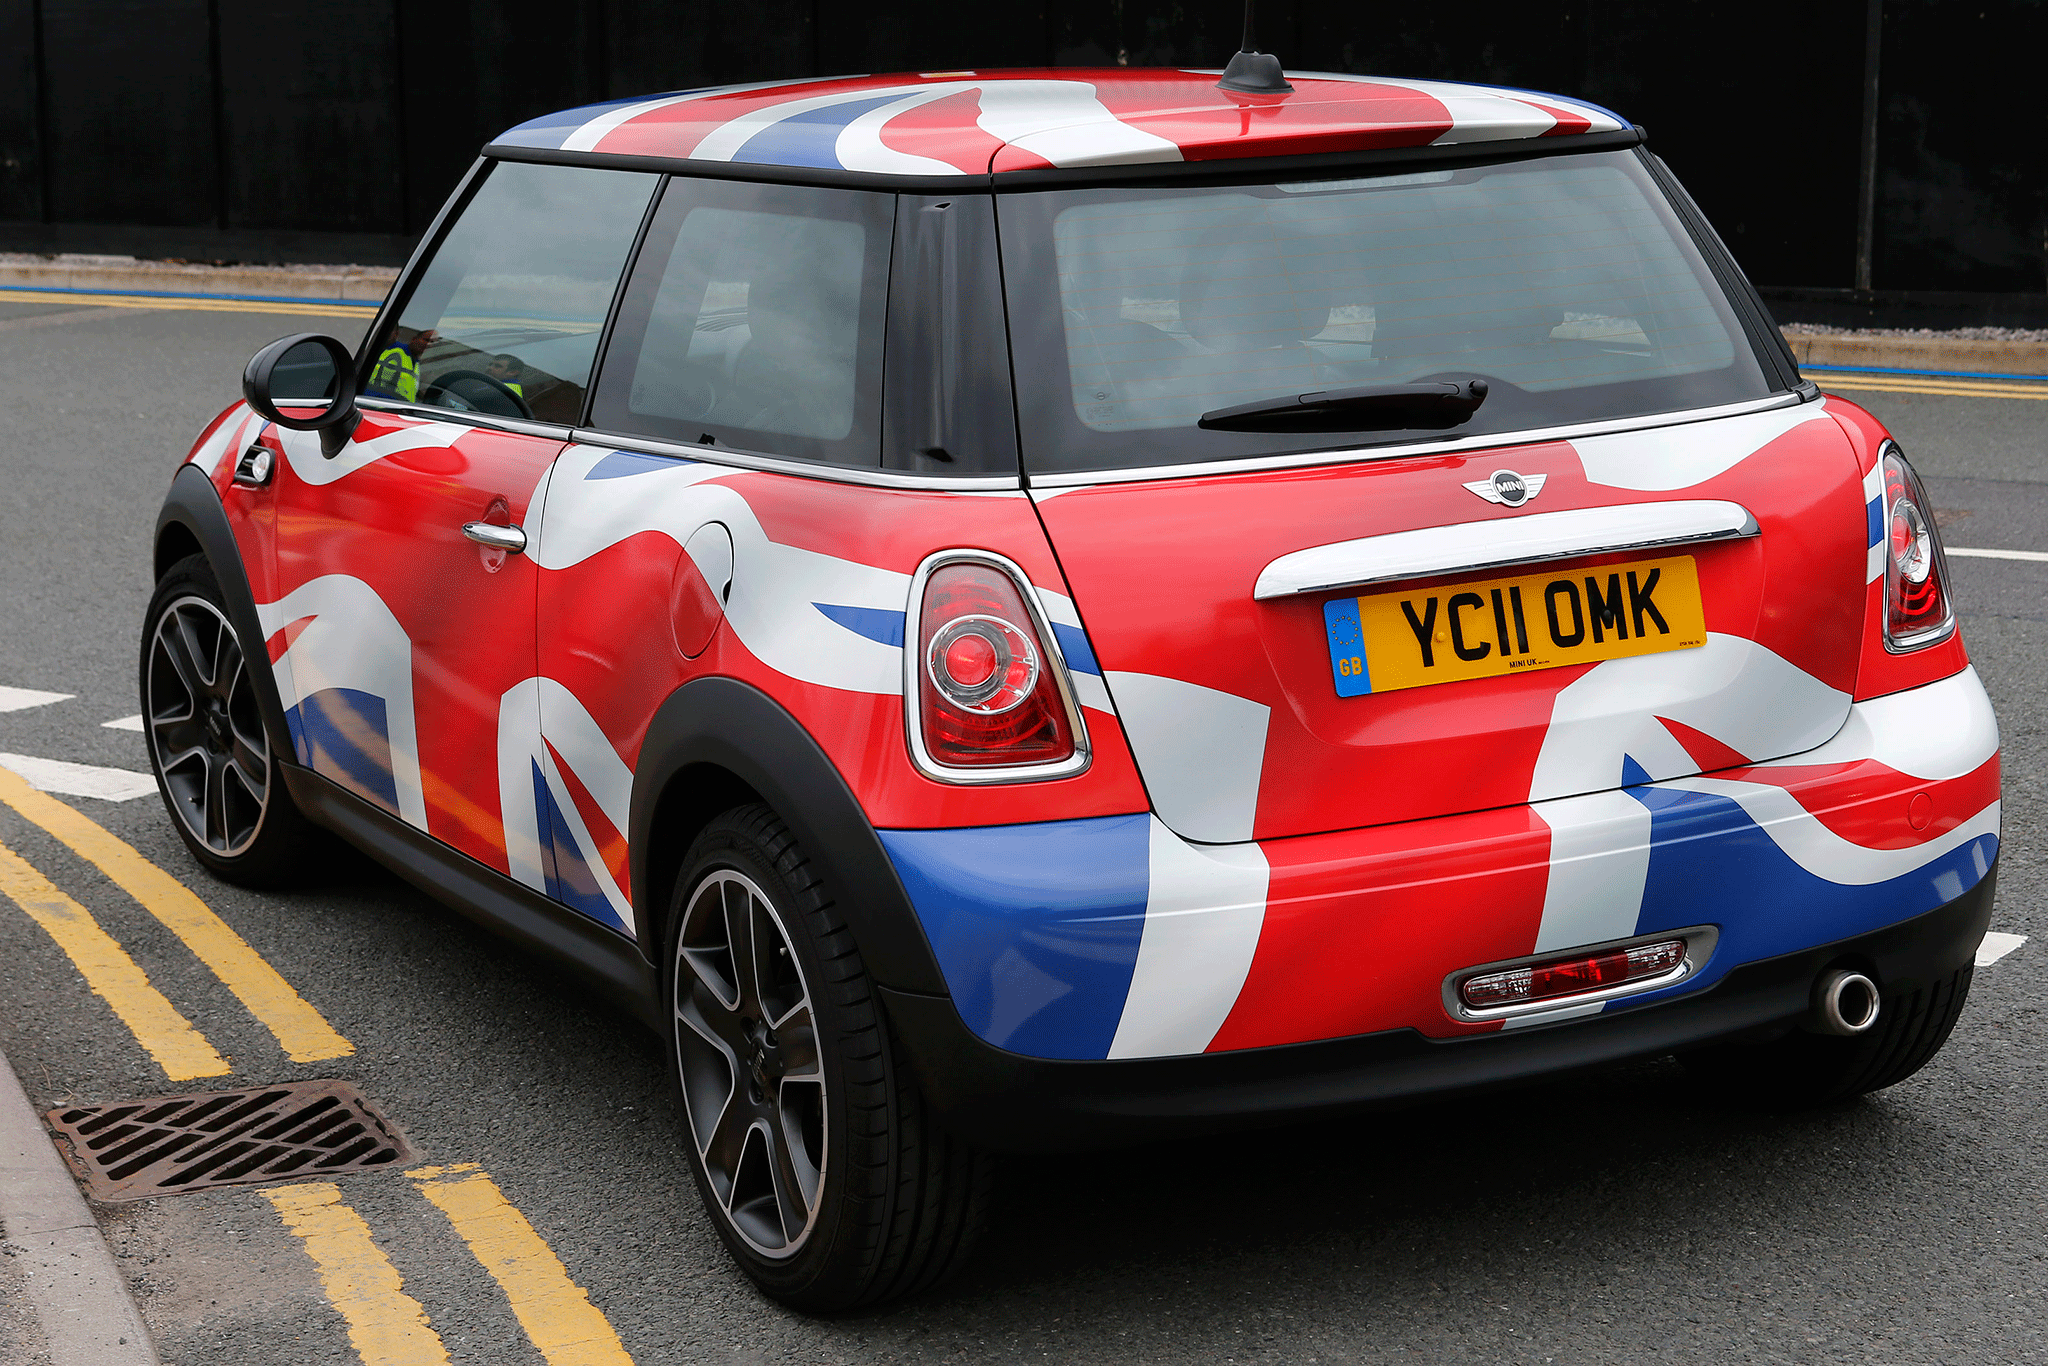 BMW boss hints at moving production of Minis out of UK after Brexit